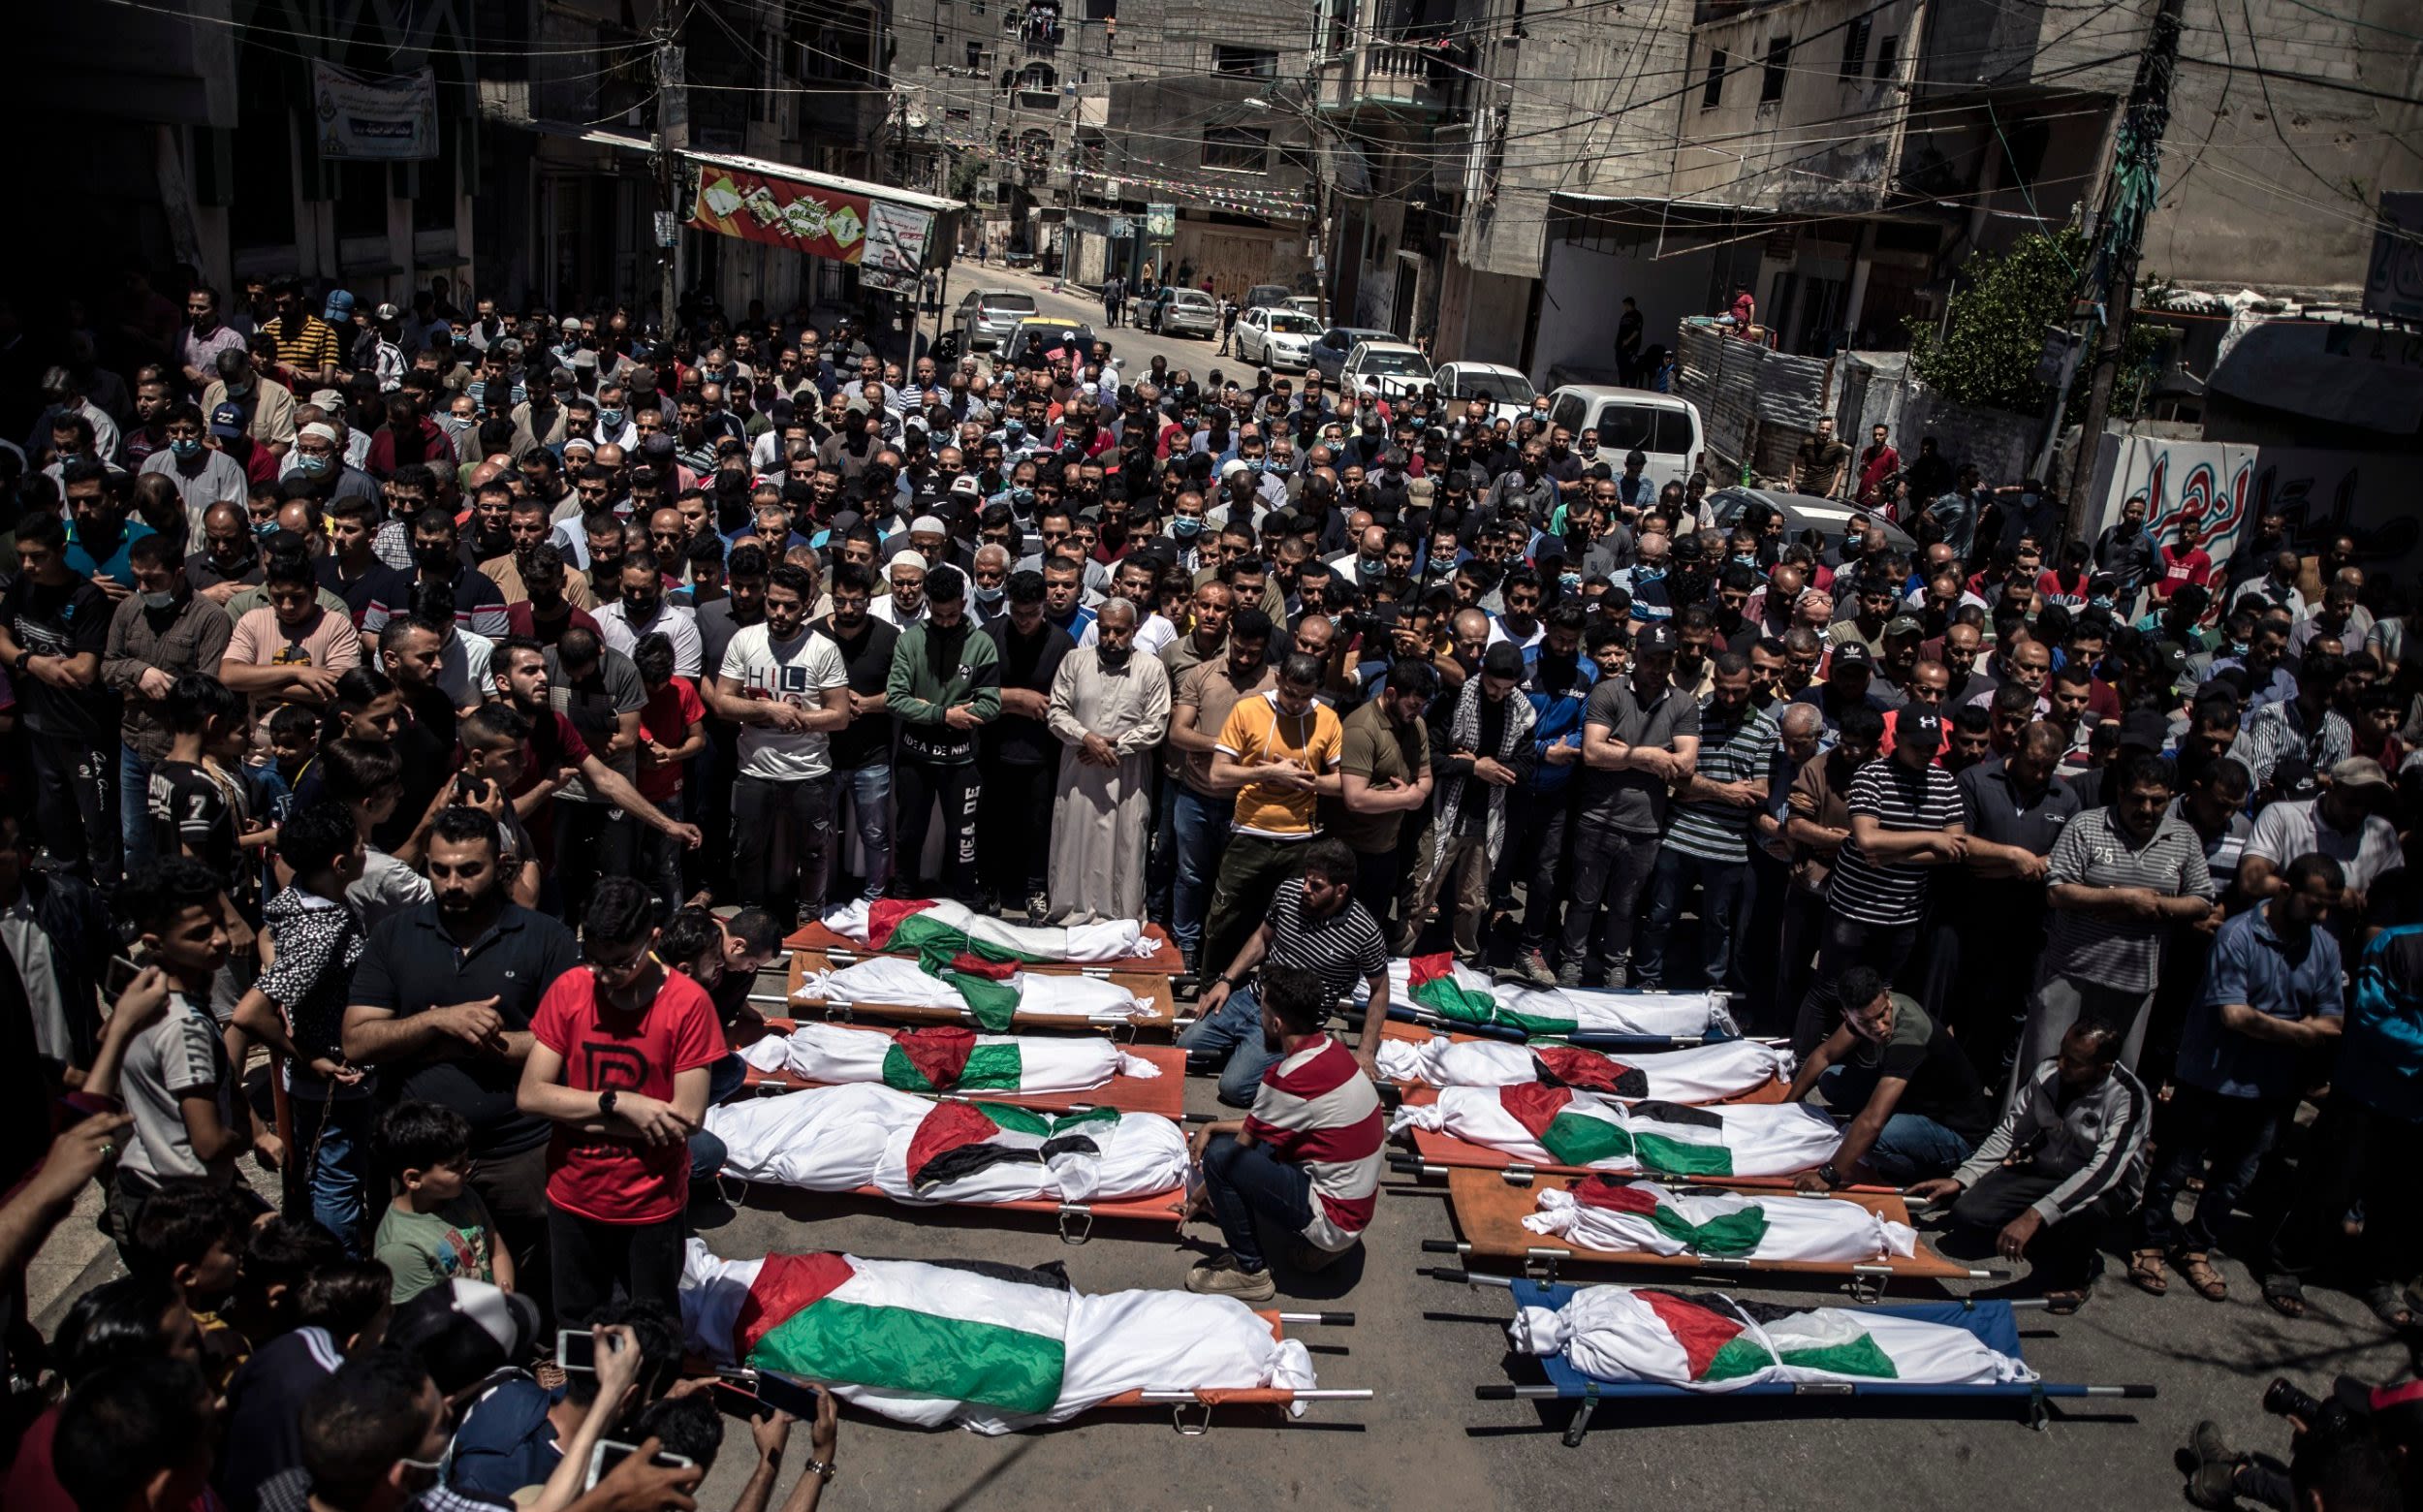 Israel urges caution on Gaza death toll after UN cuts figures